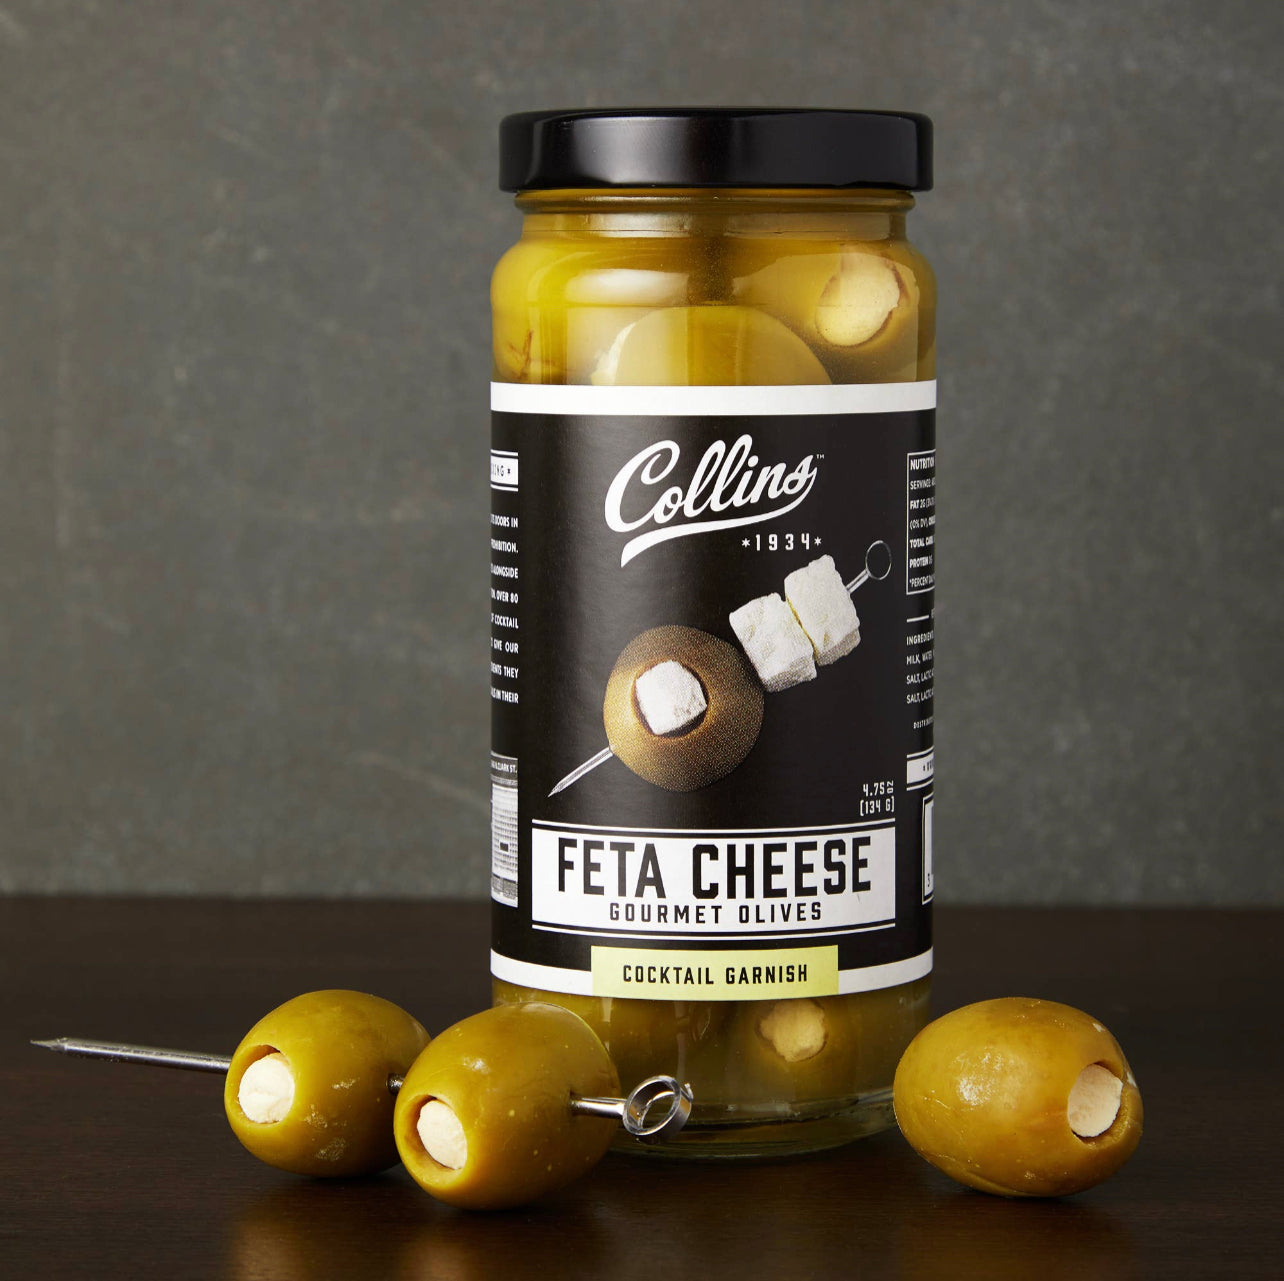 bottle of feta cheese gourmet olives cocktail garnish by Collins with examples of the actual olives displayed on a cocktail pick